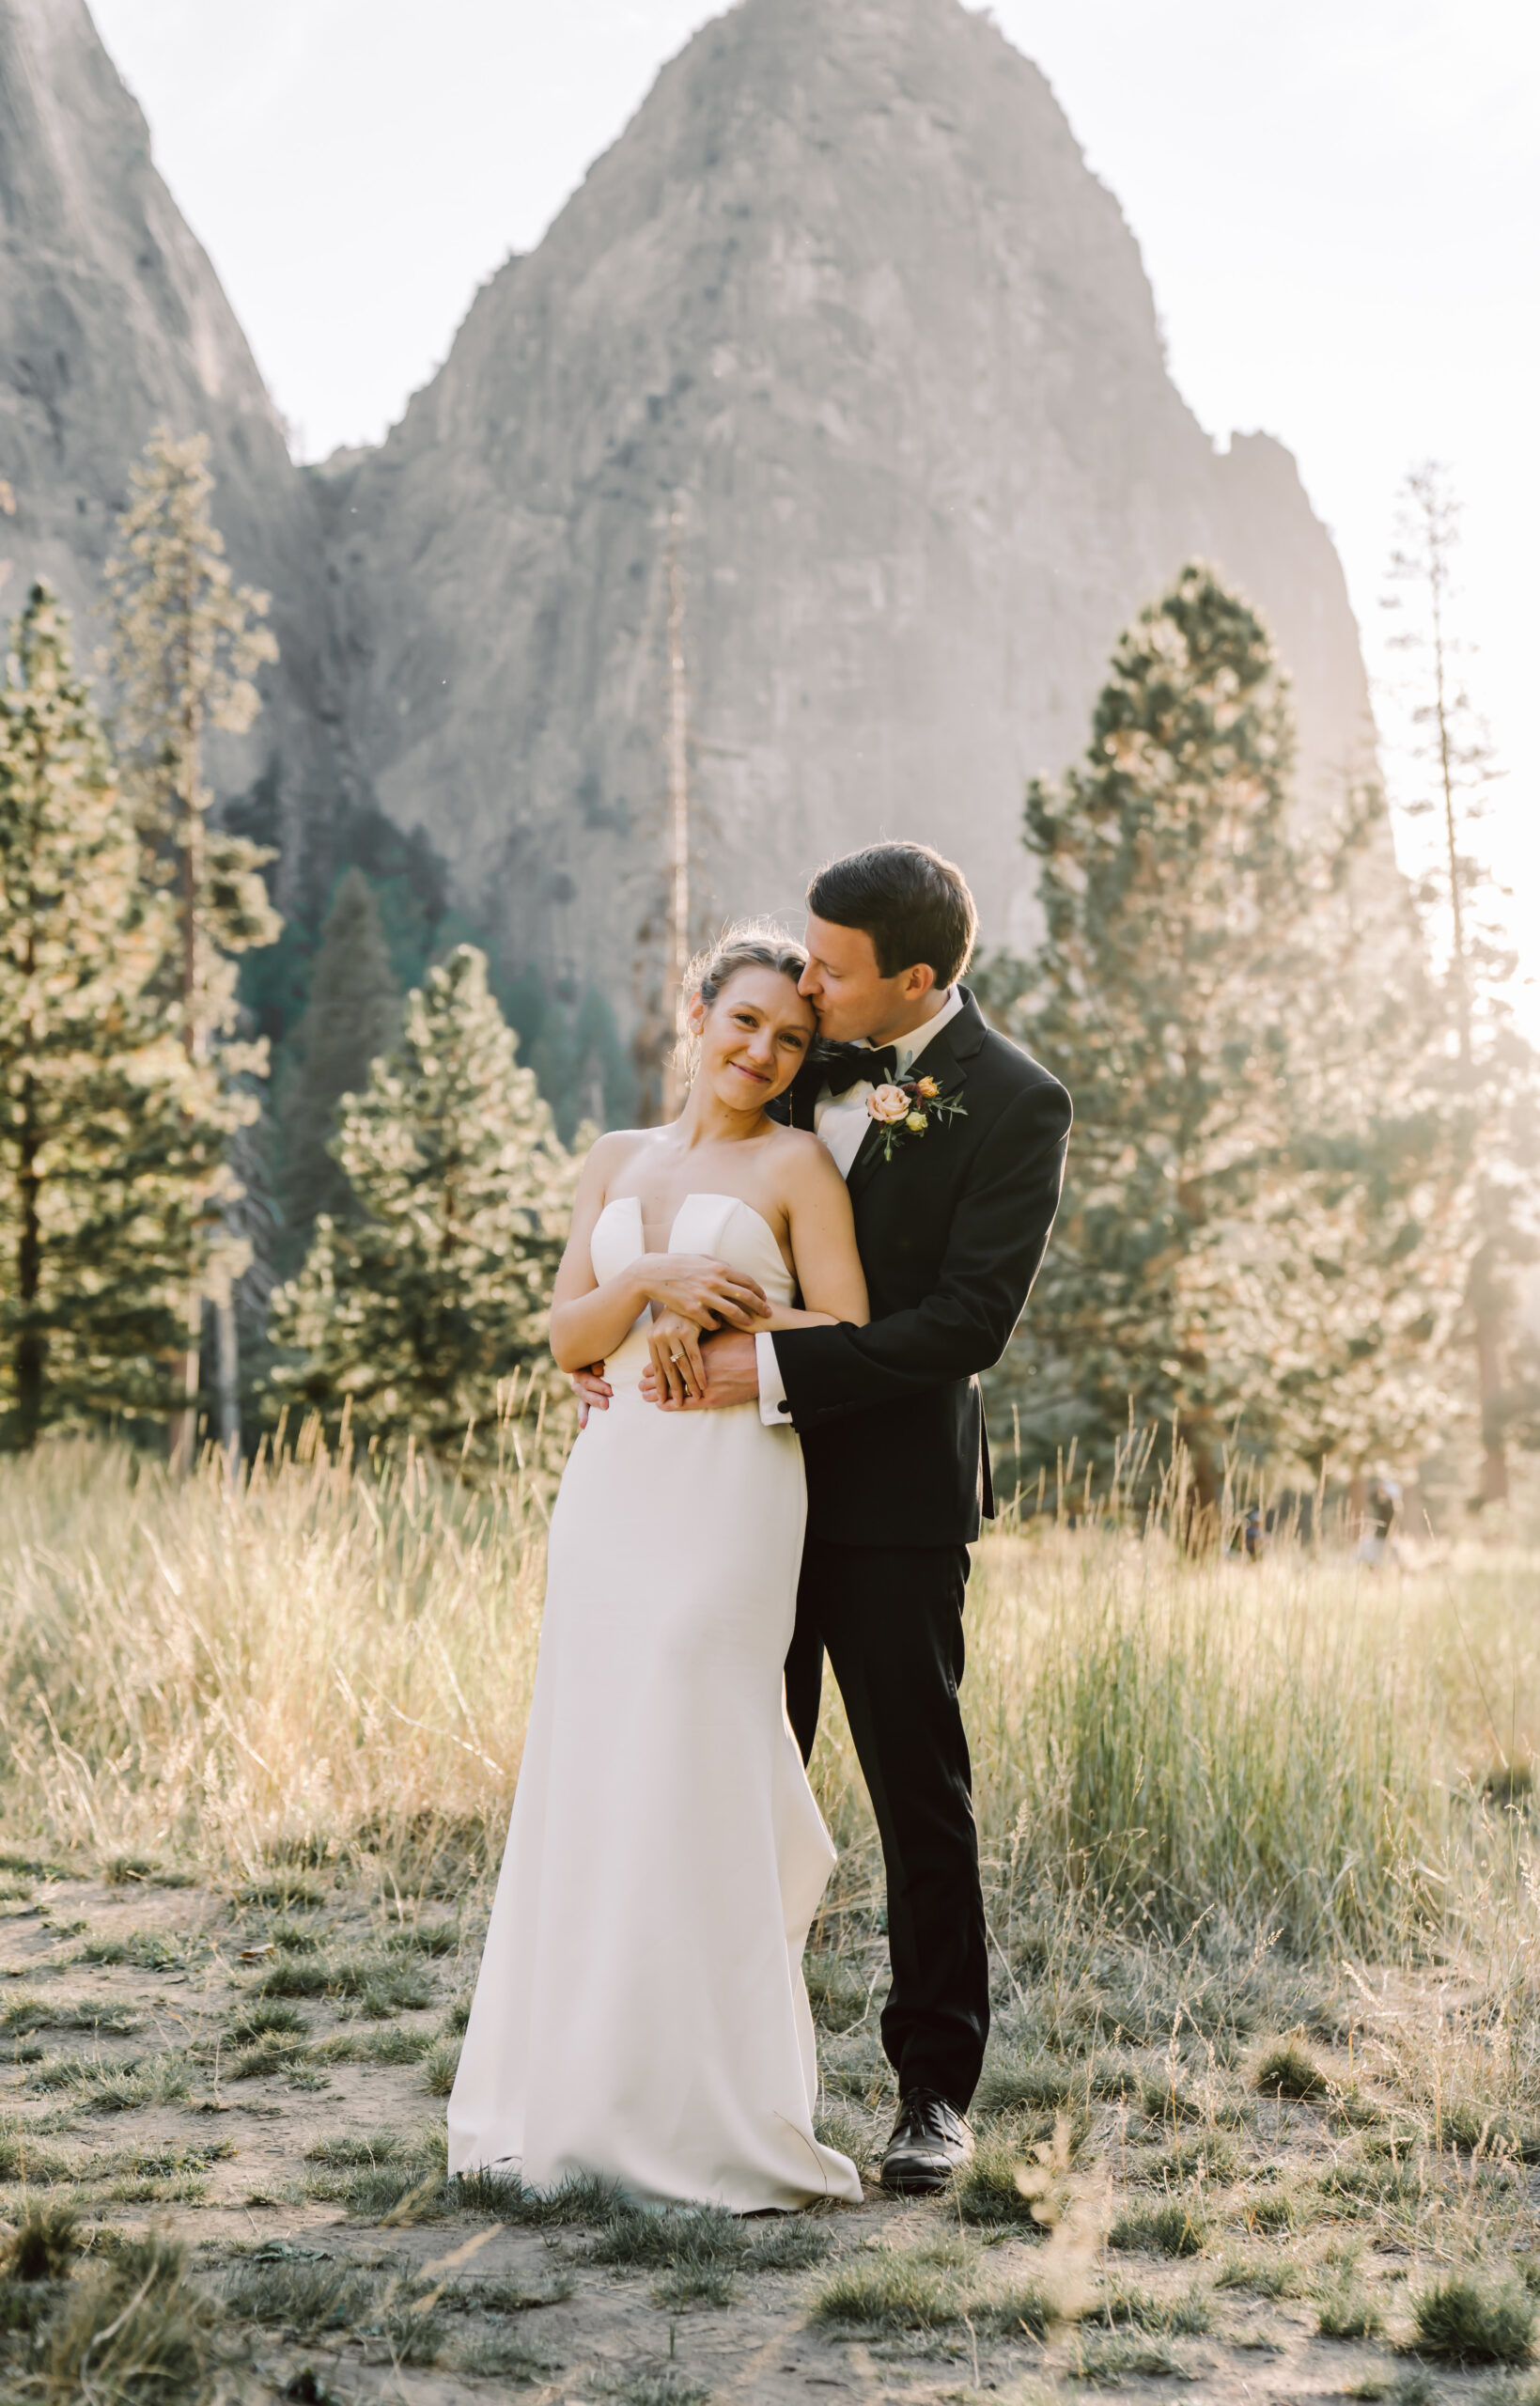 A bride and groom holding each other in front of the giant cliffs of Yosemite Valley for their elopement day 